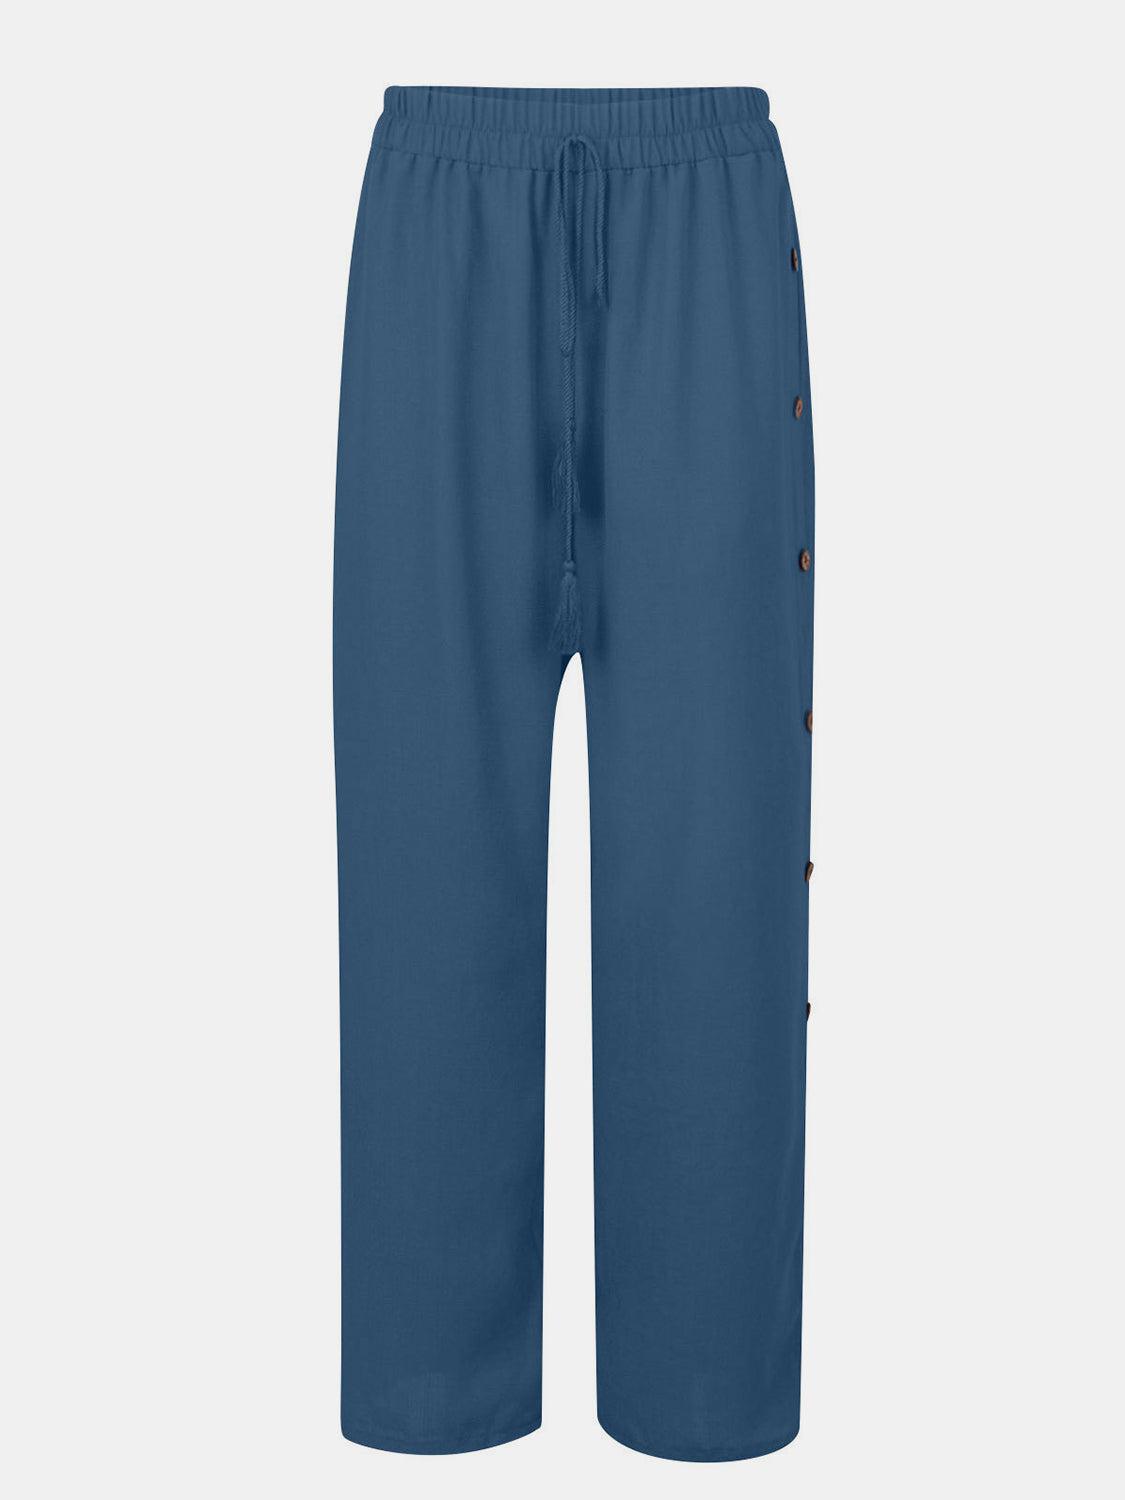 a blue pants with buttons on the side